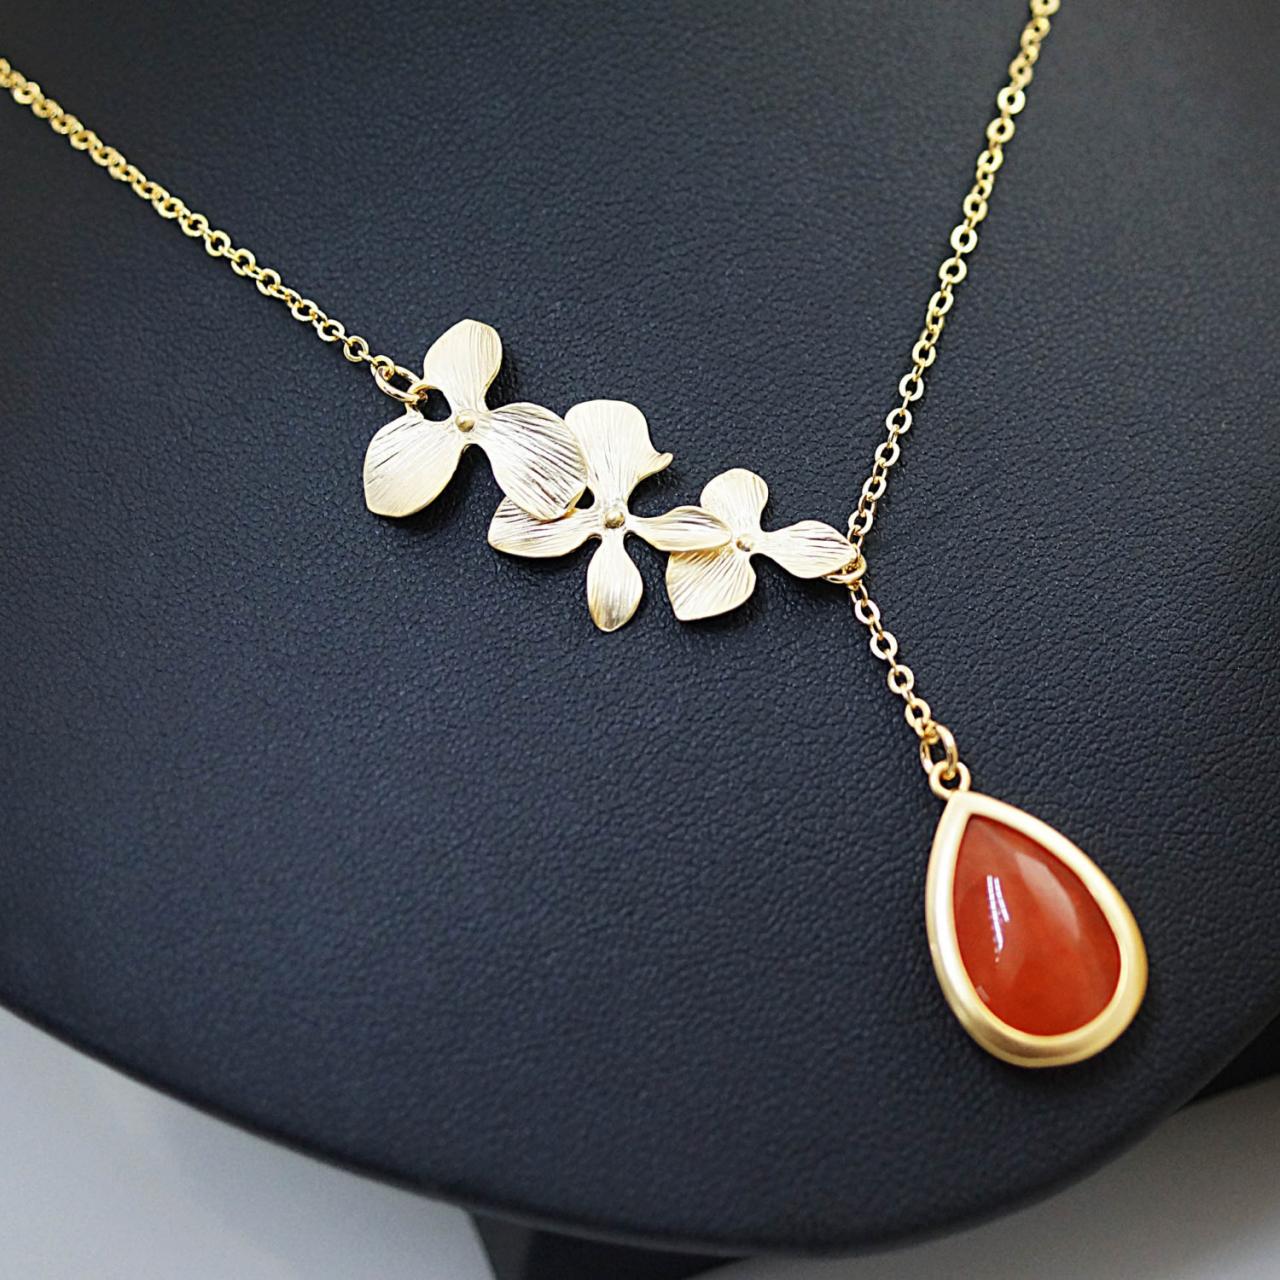 Wedding Jewelry Bridesmaid Gifts Bridesmaid Jewelry Orchid Trio Flower With Glass Tear Drop Necklace , For Her. Gift For Her